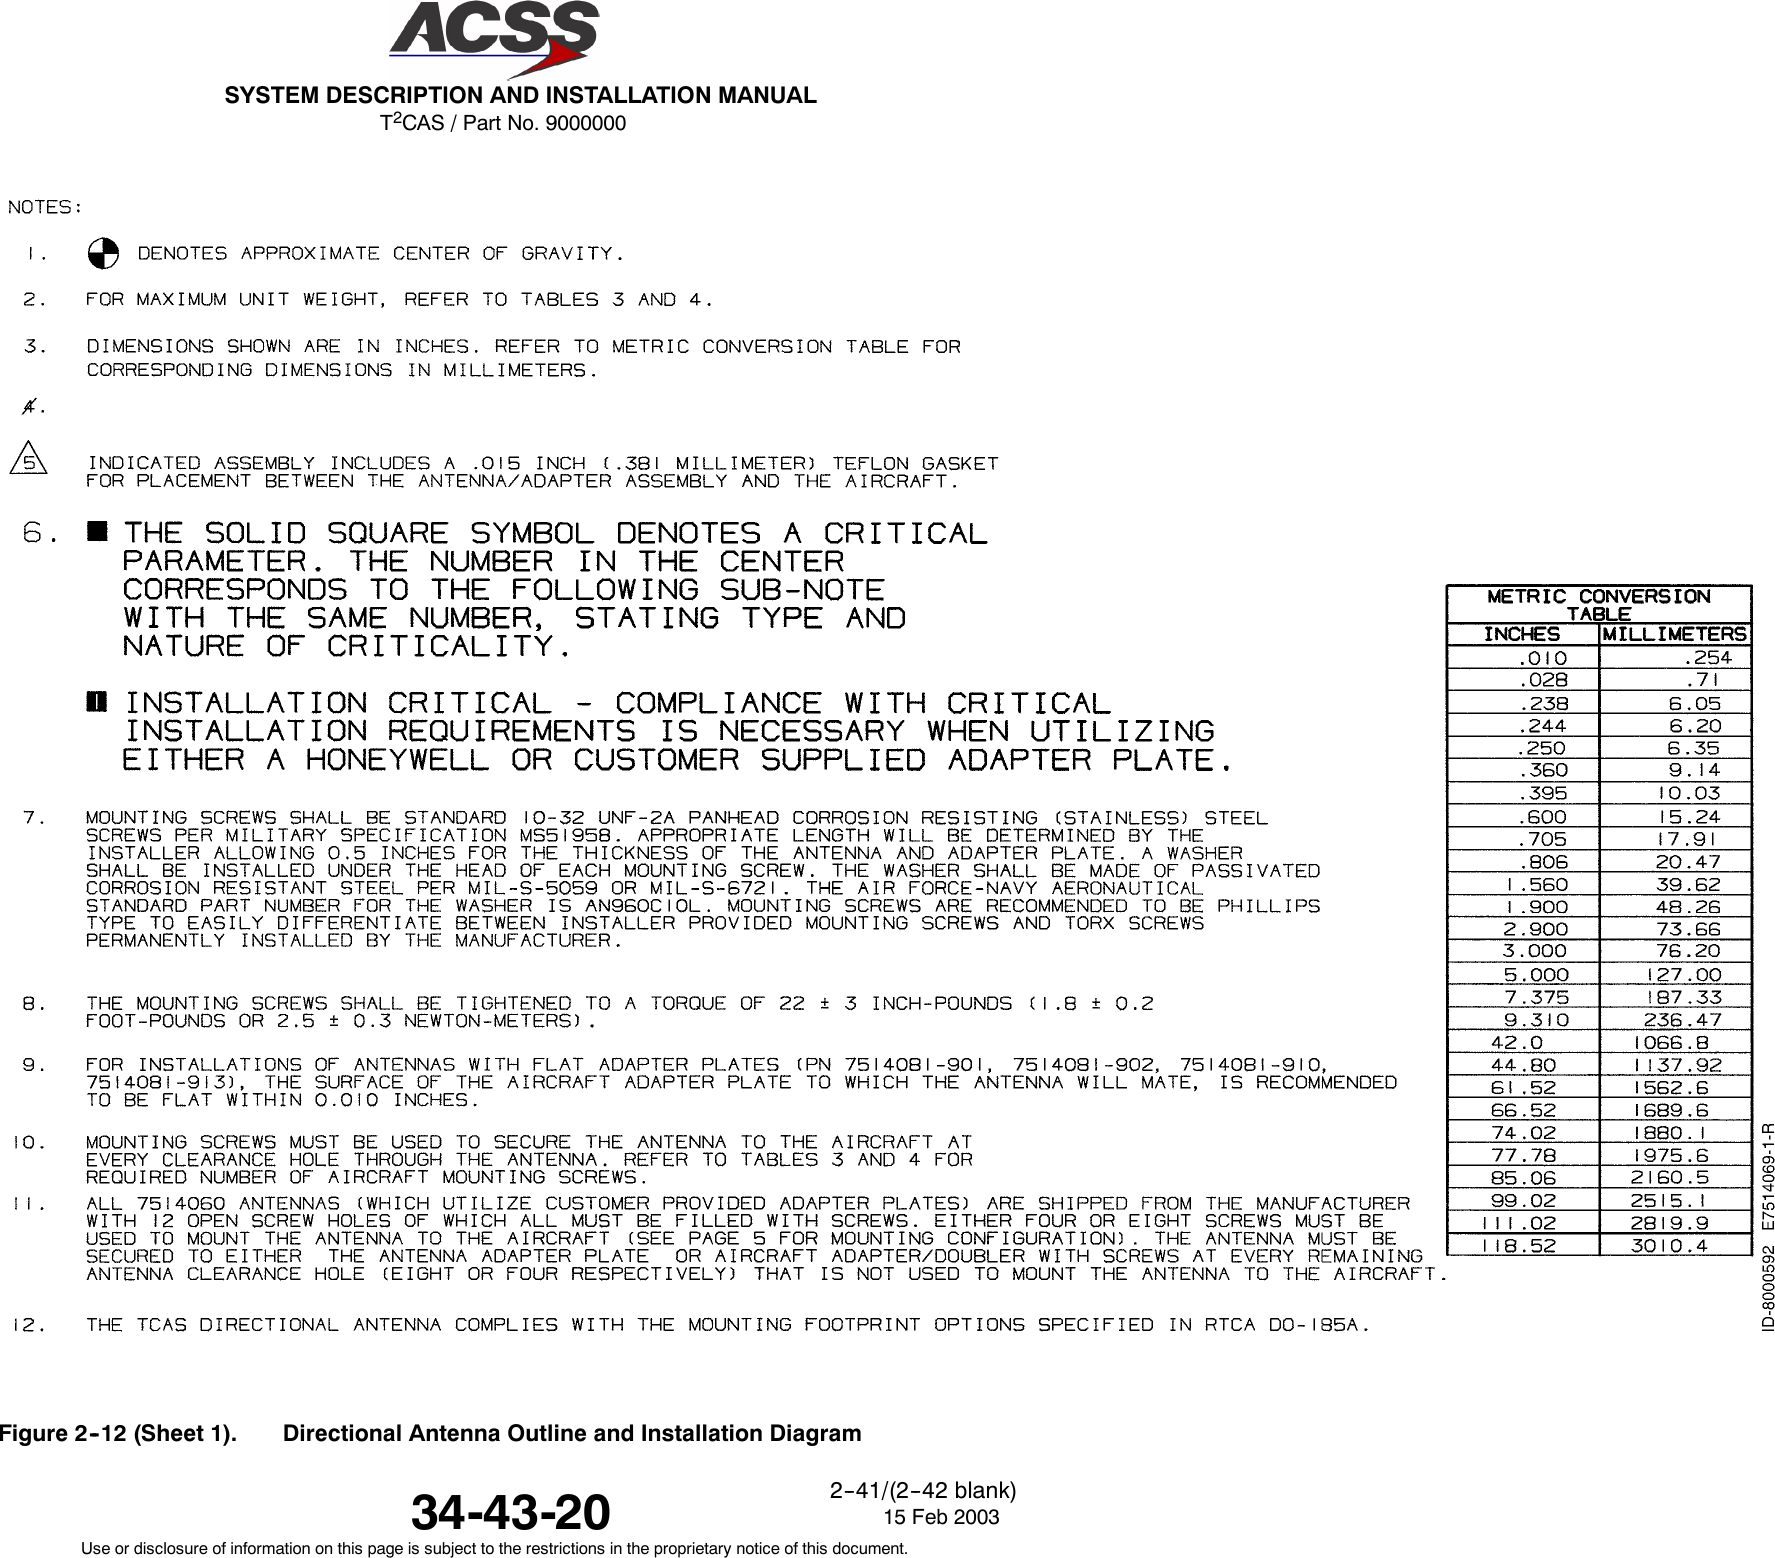 T2CAS / Part No. 9000000SYSTEM DESCRIPTION AND INSTALLATION MANUAL34-43-20 15 Feb 2003Use or disclosure of information on this page is subject to the restrictions in the proprietary notice of this document.2--41/(2--42 blank)Figure 2--12 (Sheet 1). Directional Antenna Outline and Installation Diagram